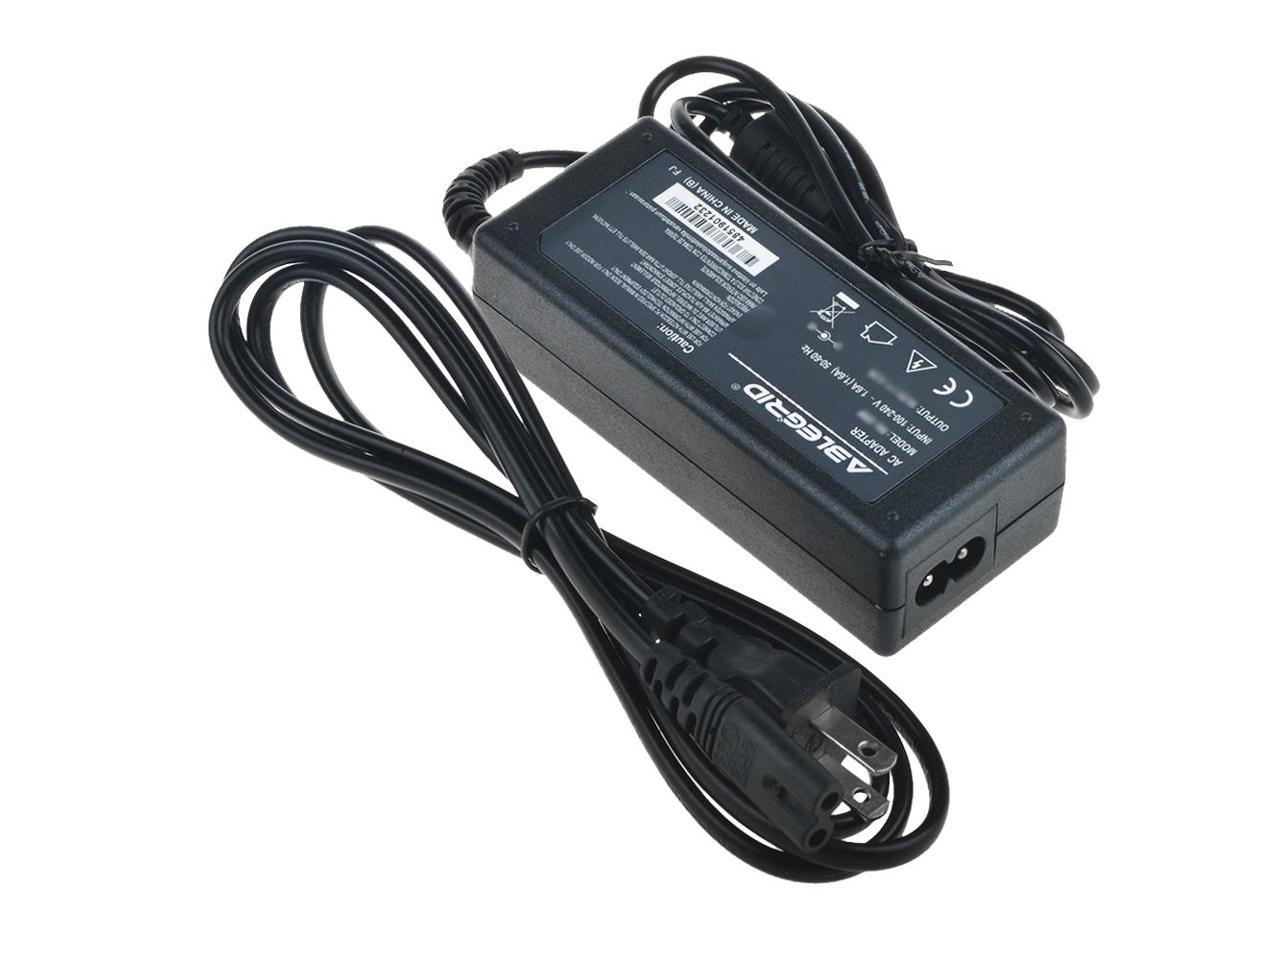 SLLEA AC/DC Adapter for Yealink SIP-T21P E2 IP Phone SIP-T19P E2 IP Phone Power Supply Cord Cable PS Charger PSU 